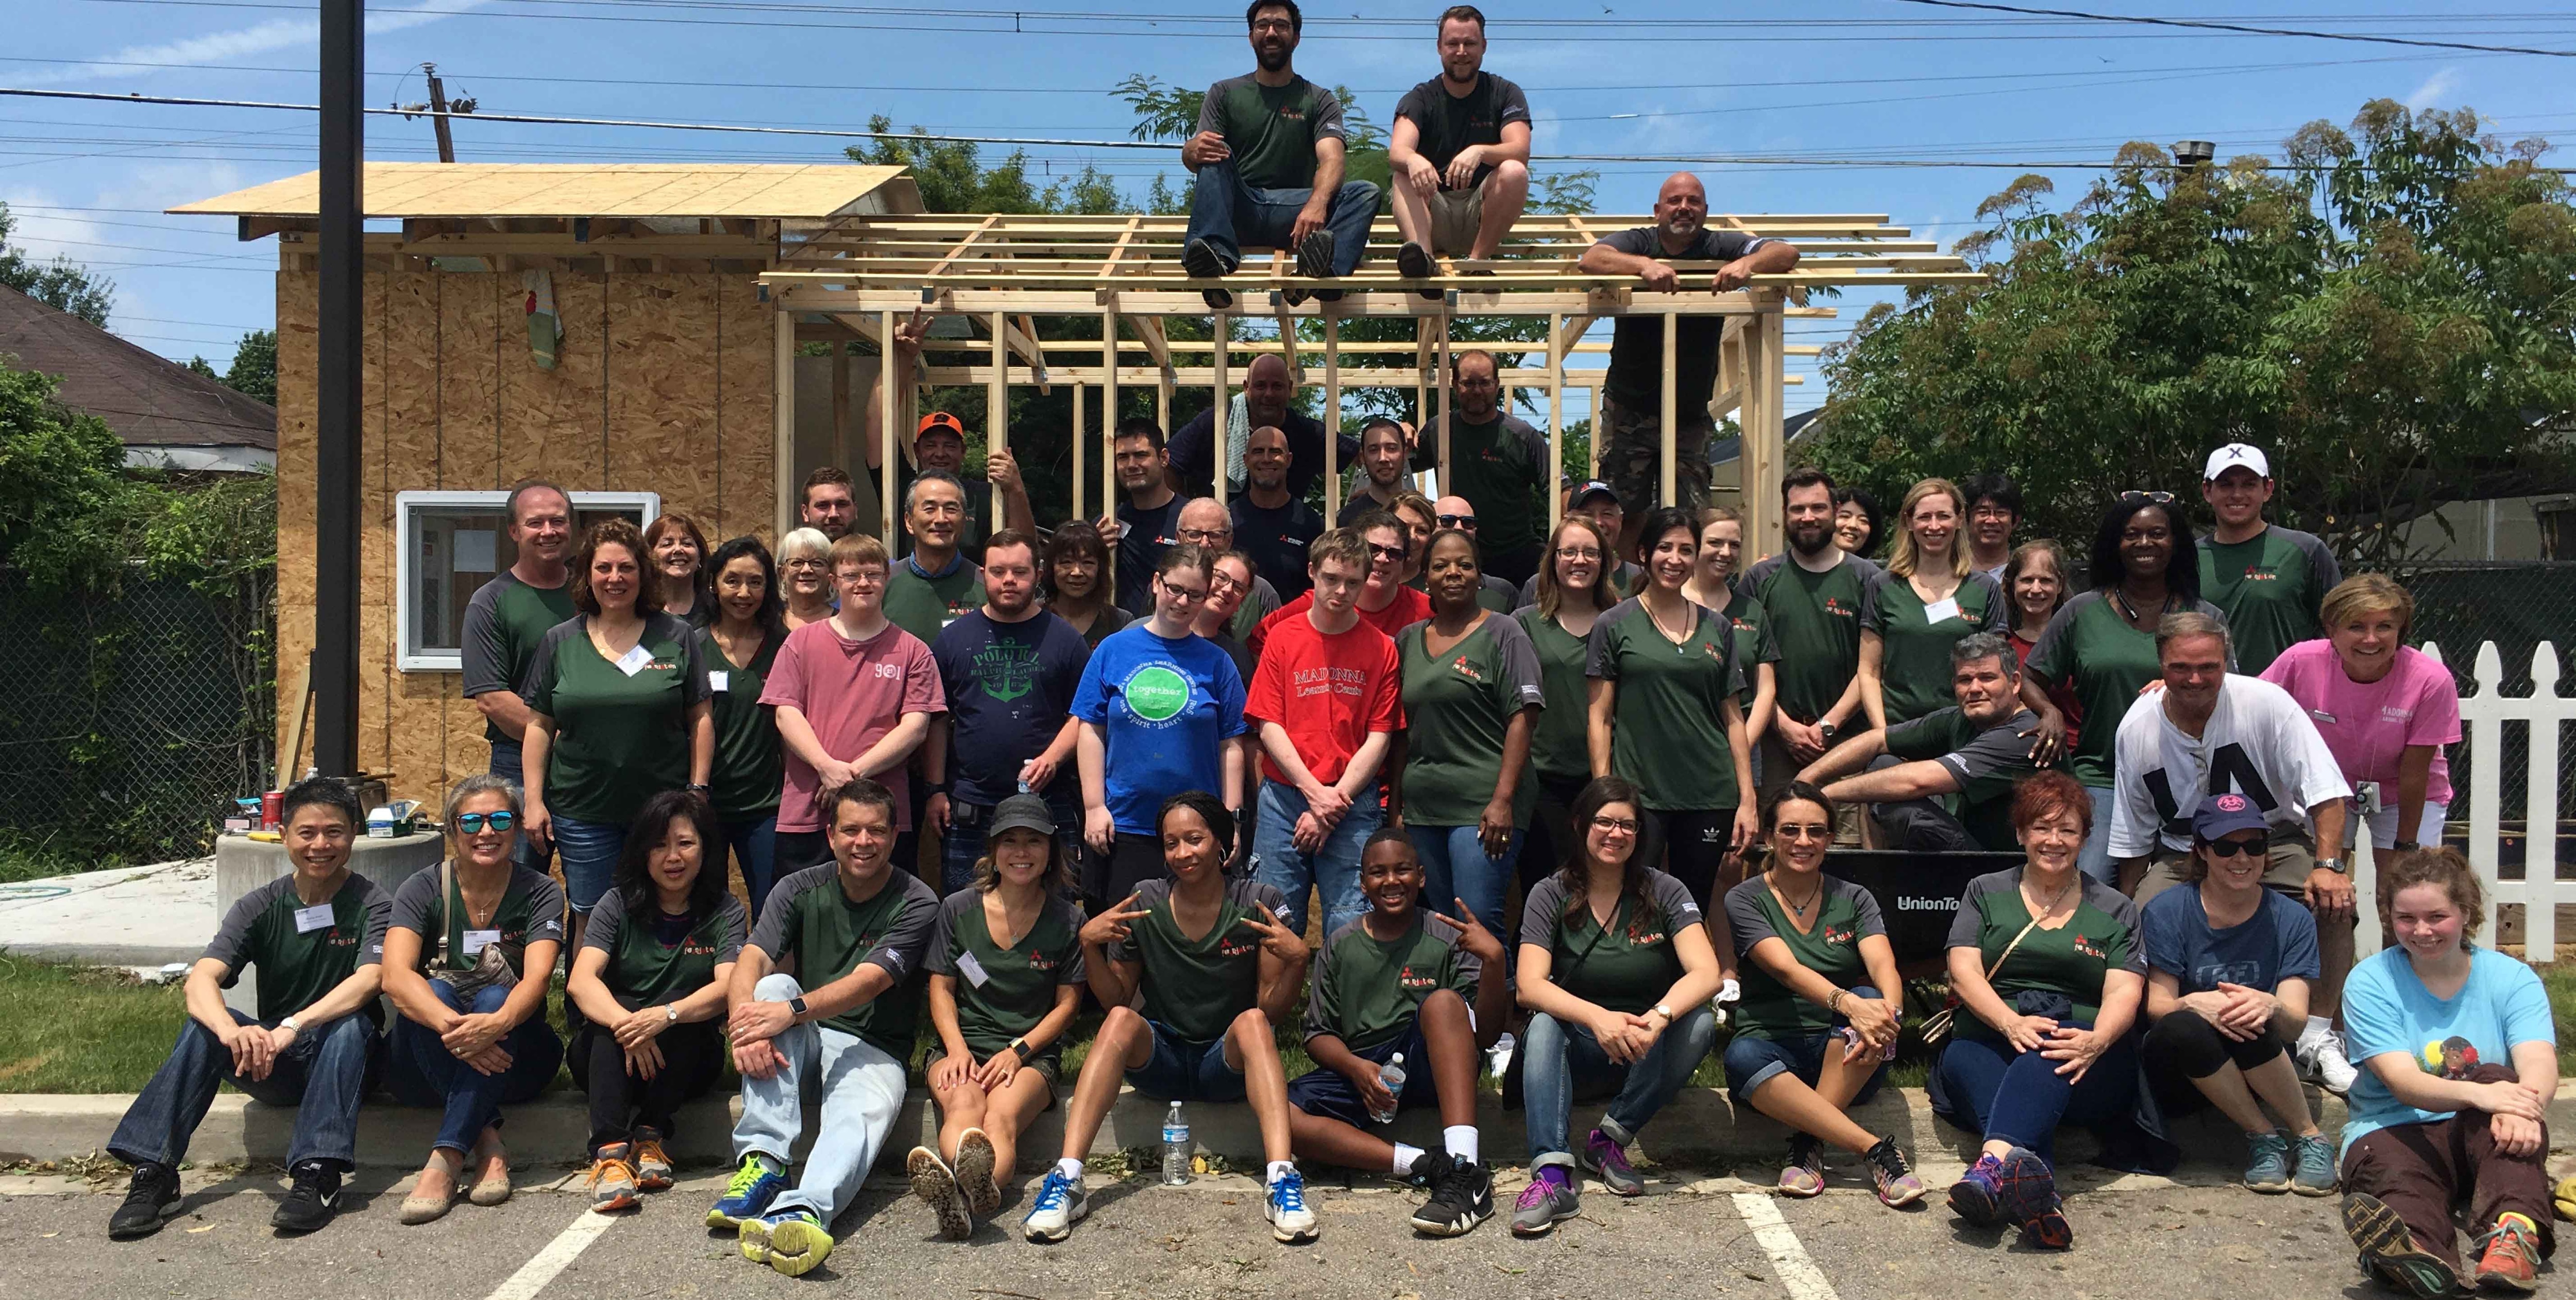 Large inclusive community group, building a house together.